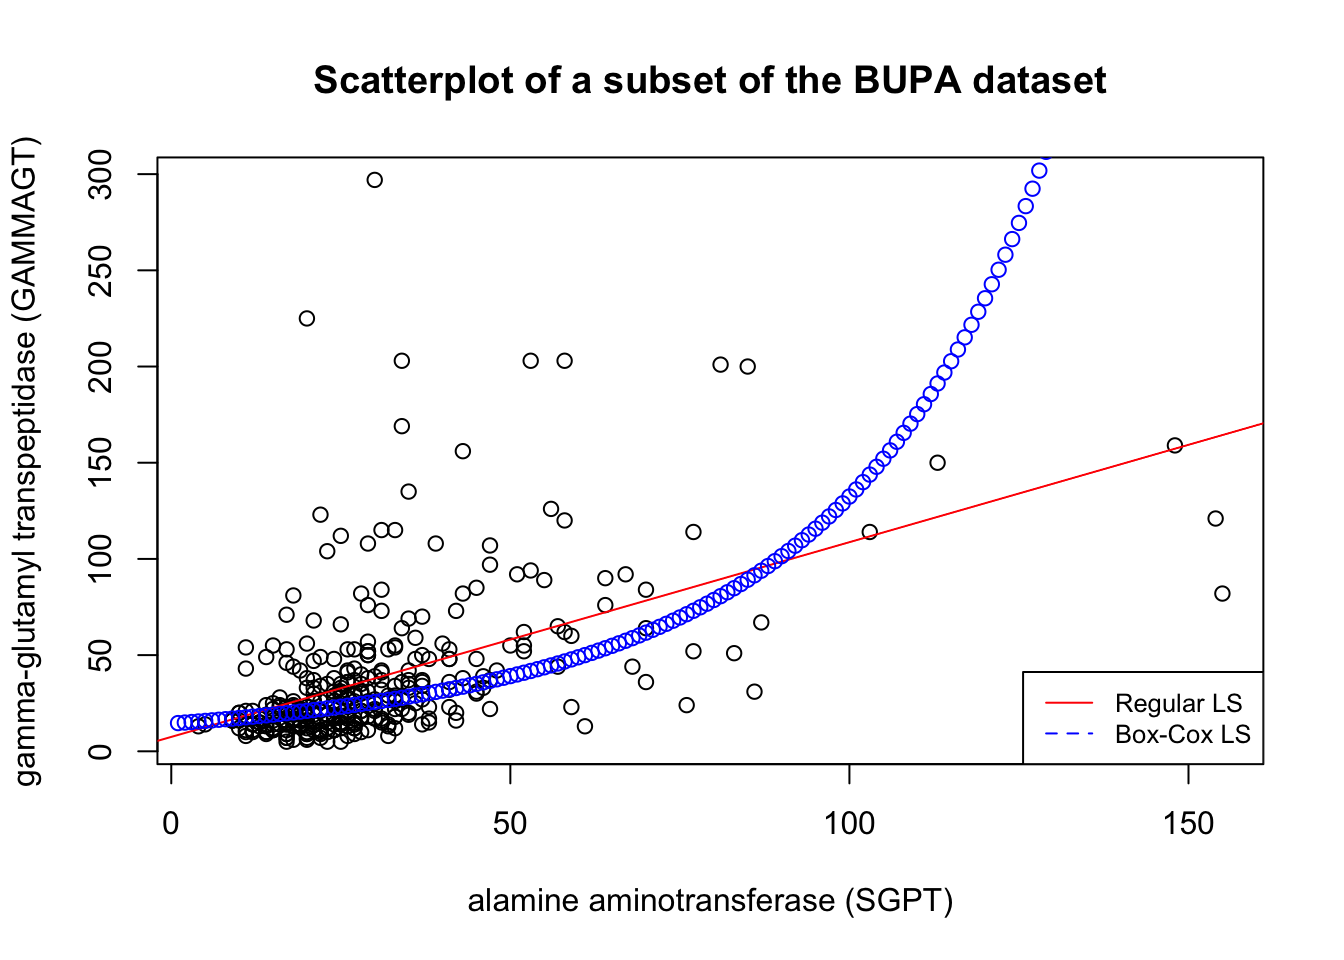 Inverted Box-Cox transformation in the BUPA dataset.